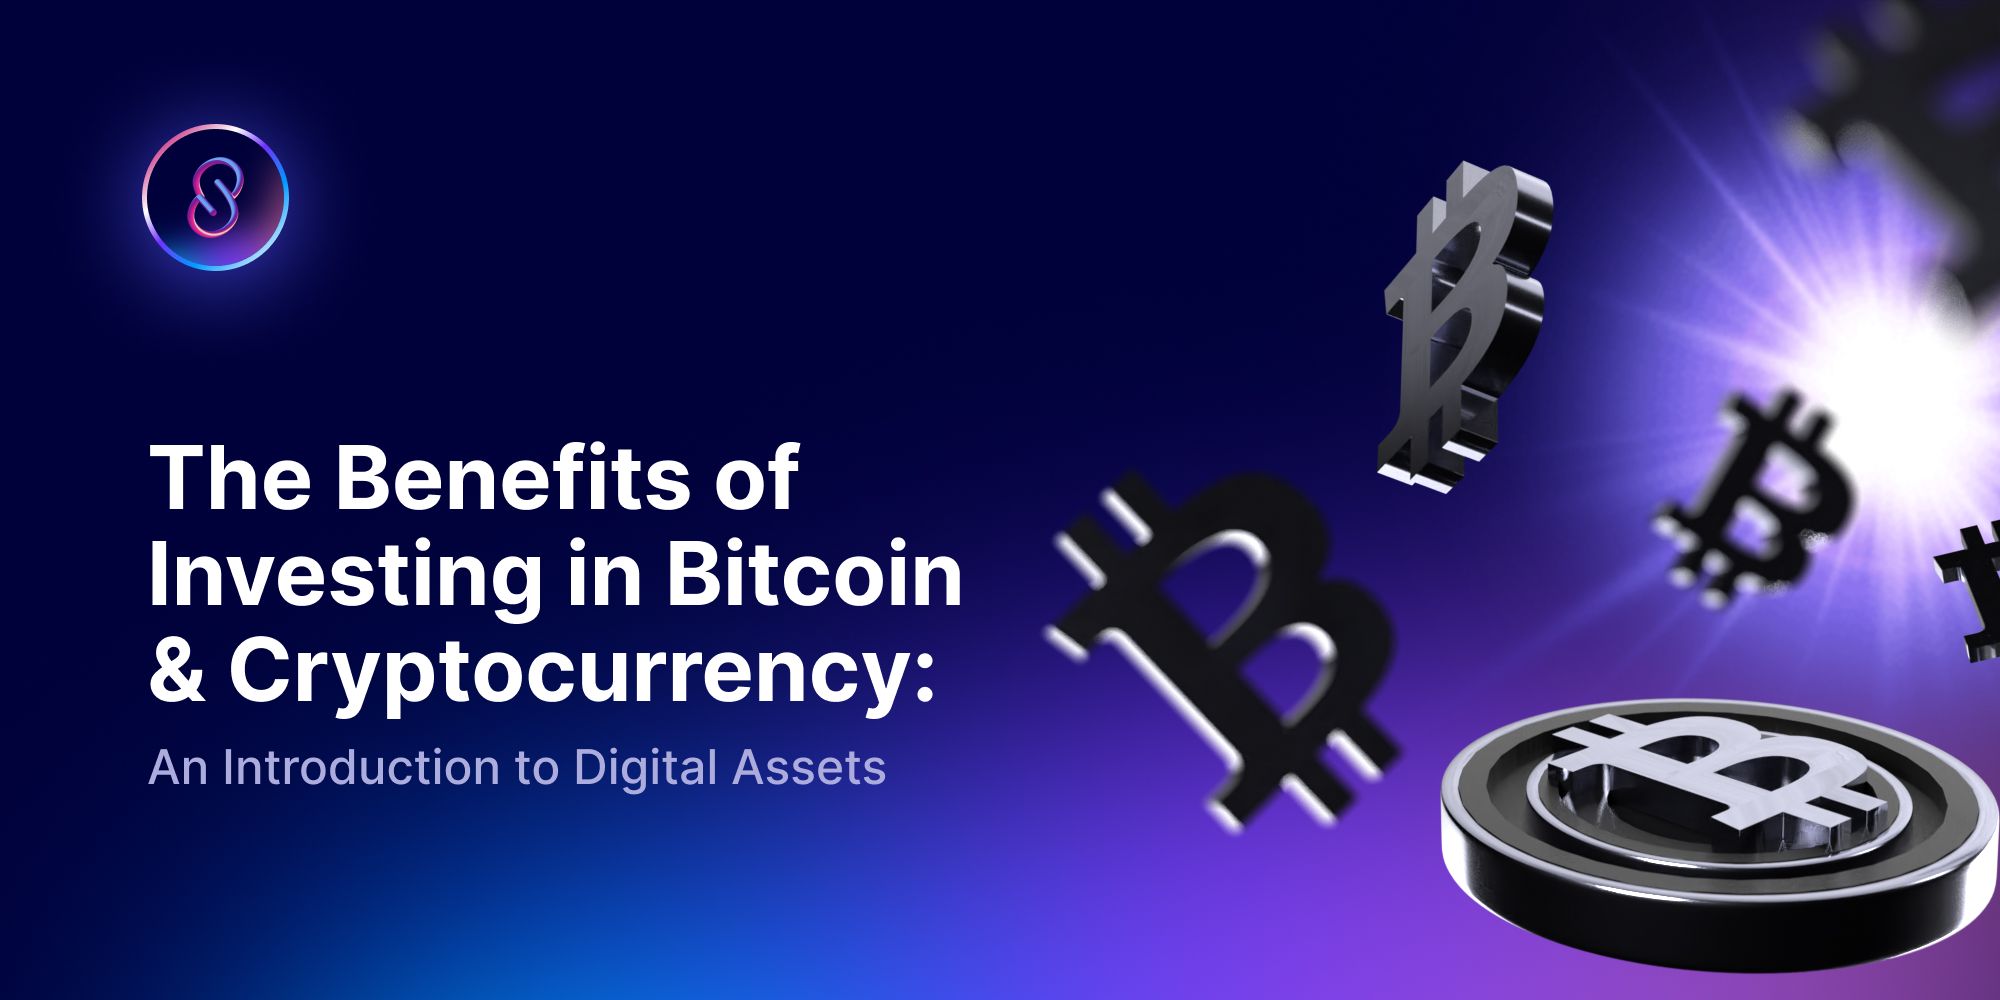 The Potential Benefits of Investing in Bitcoin & Cryptocurrency: An Introduction to Digital Assets